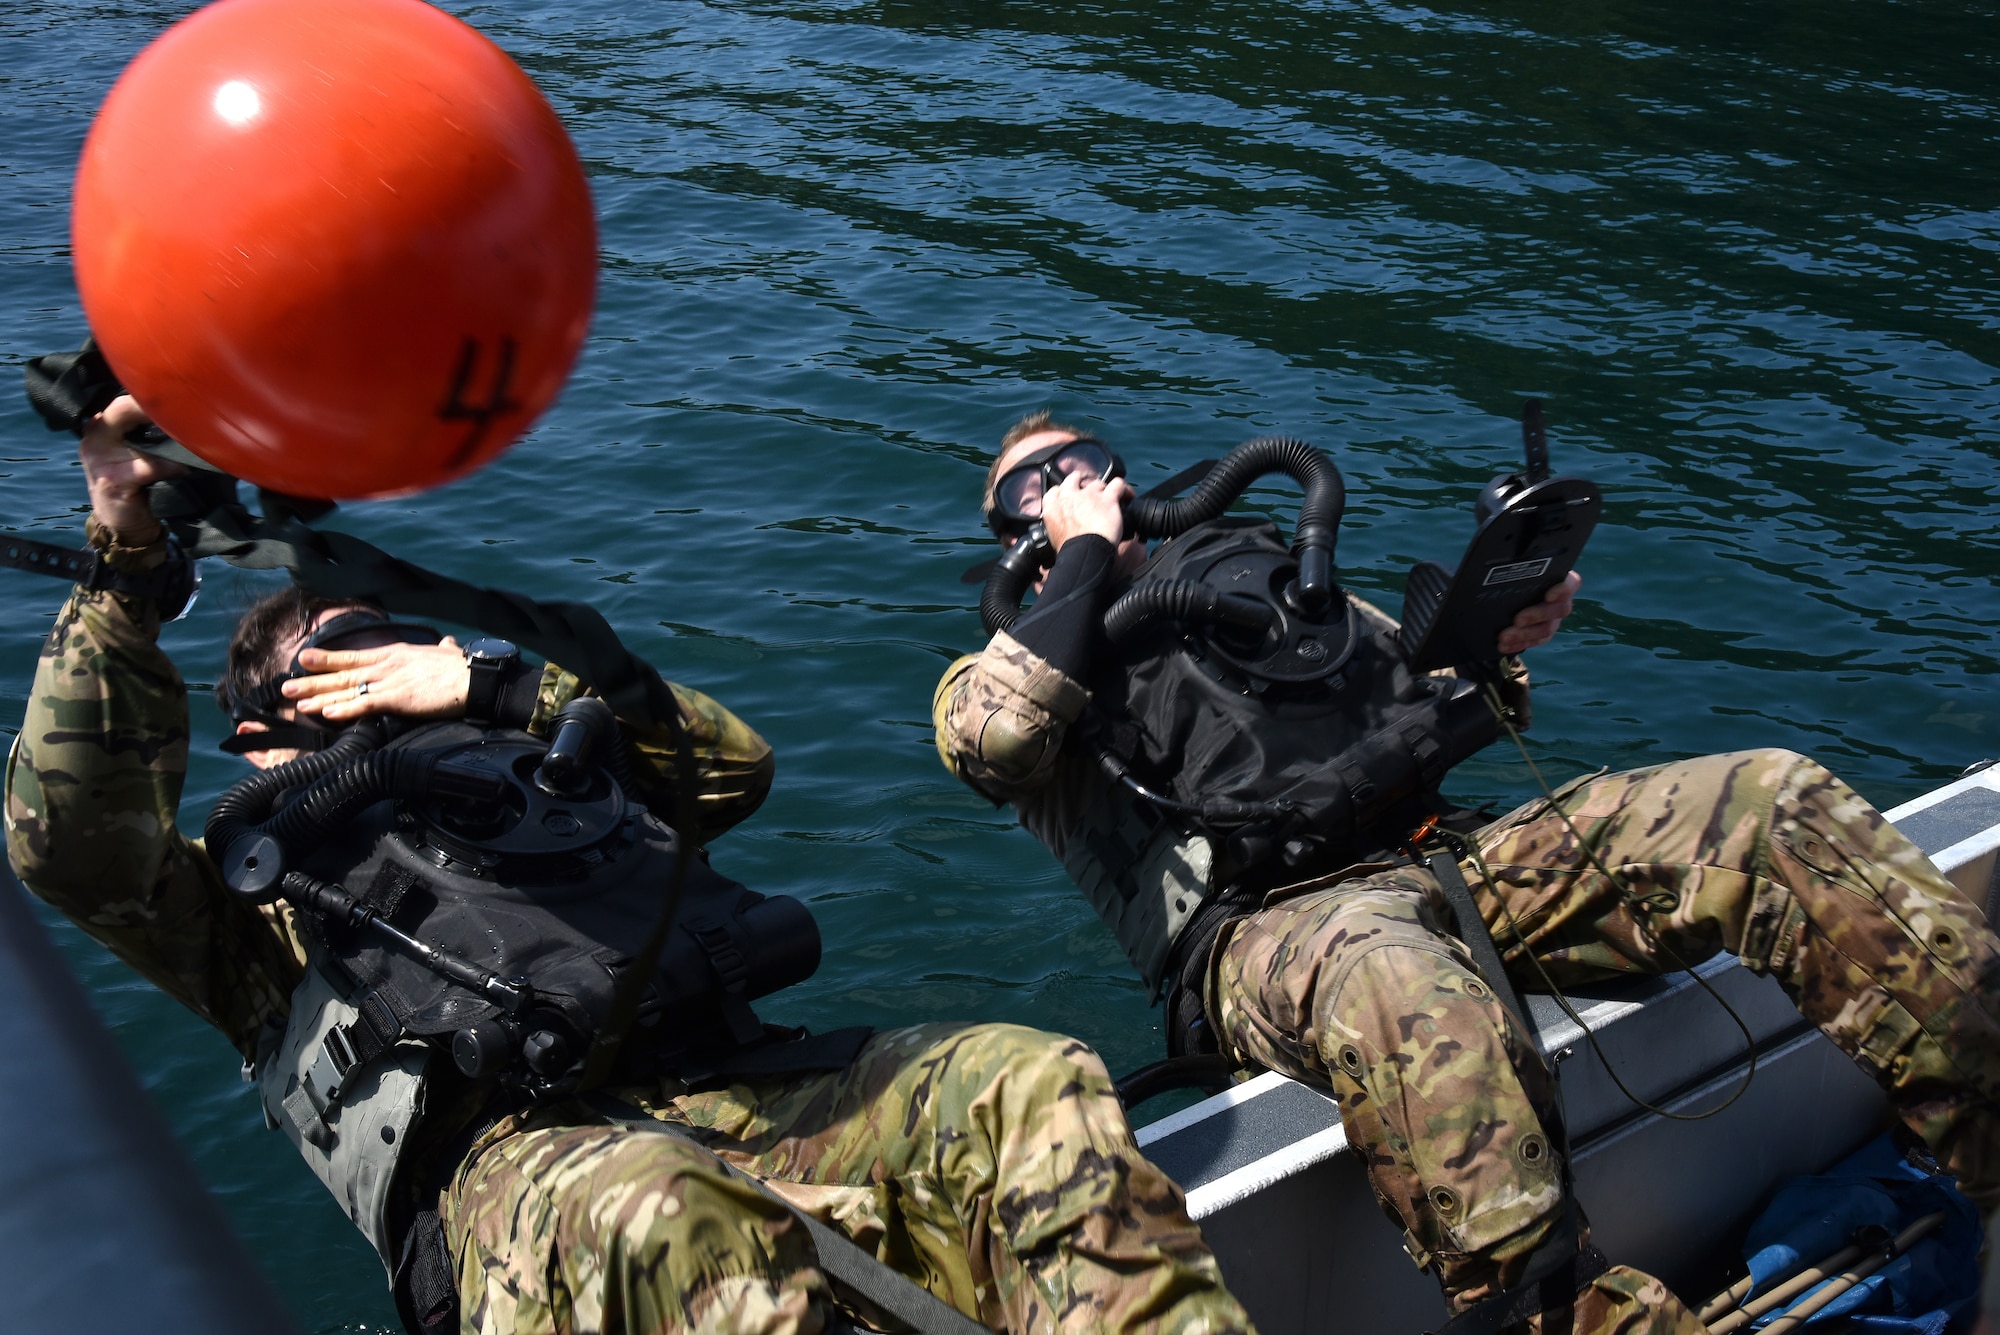 U.S. Air Force 125th Special Tactics Airmen from the Portland Air National Guard Base, along with members of joint forces, participate in closed-circuit dive training at Joint Base Lewis McChord, Wash., July 31, 2020.  Special Tactics operators conducted recurrency dives and training on new equipment.